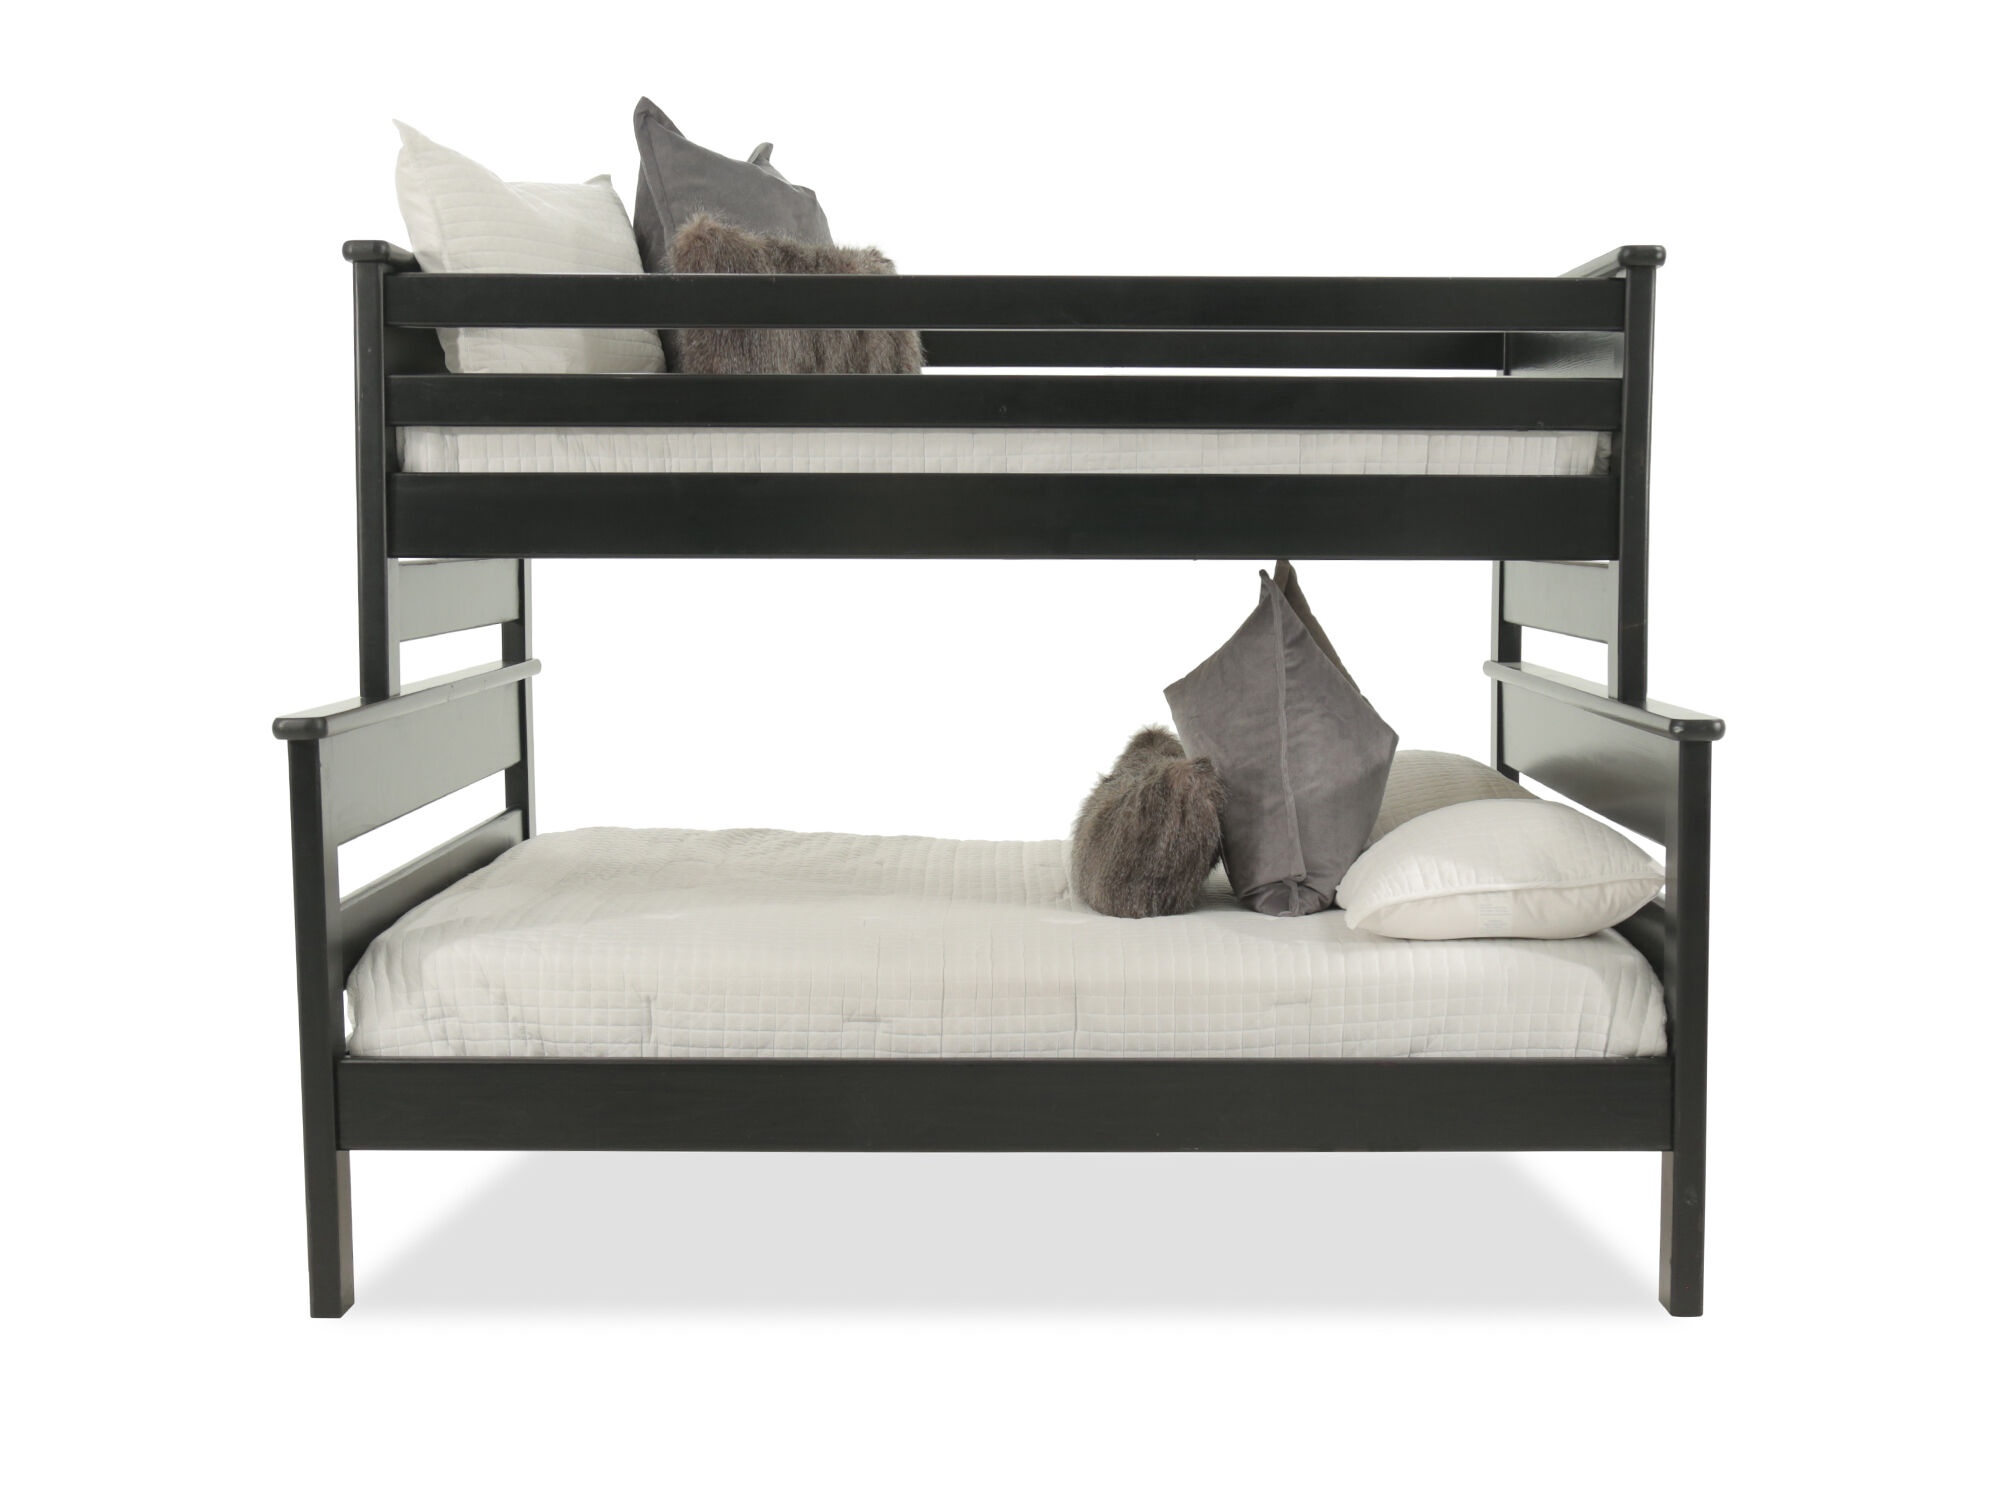 Transitional Youth Twin Over Full Bunk, Trendwood Bunk Bed